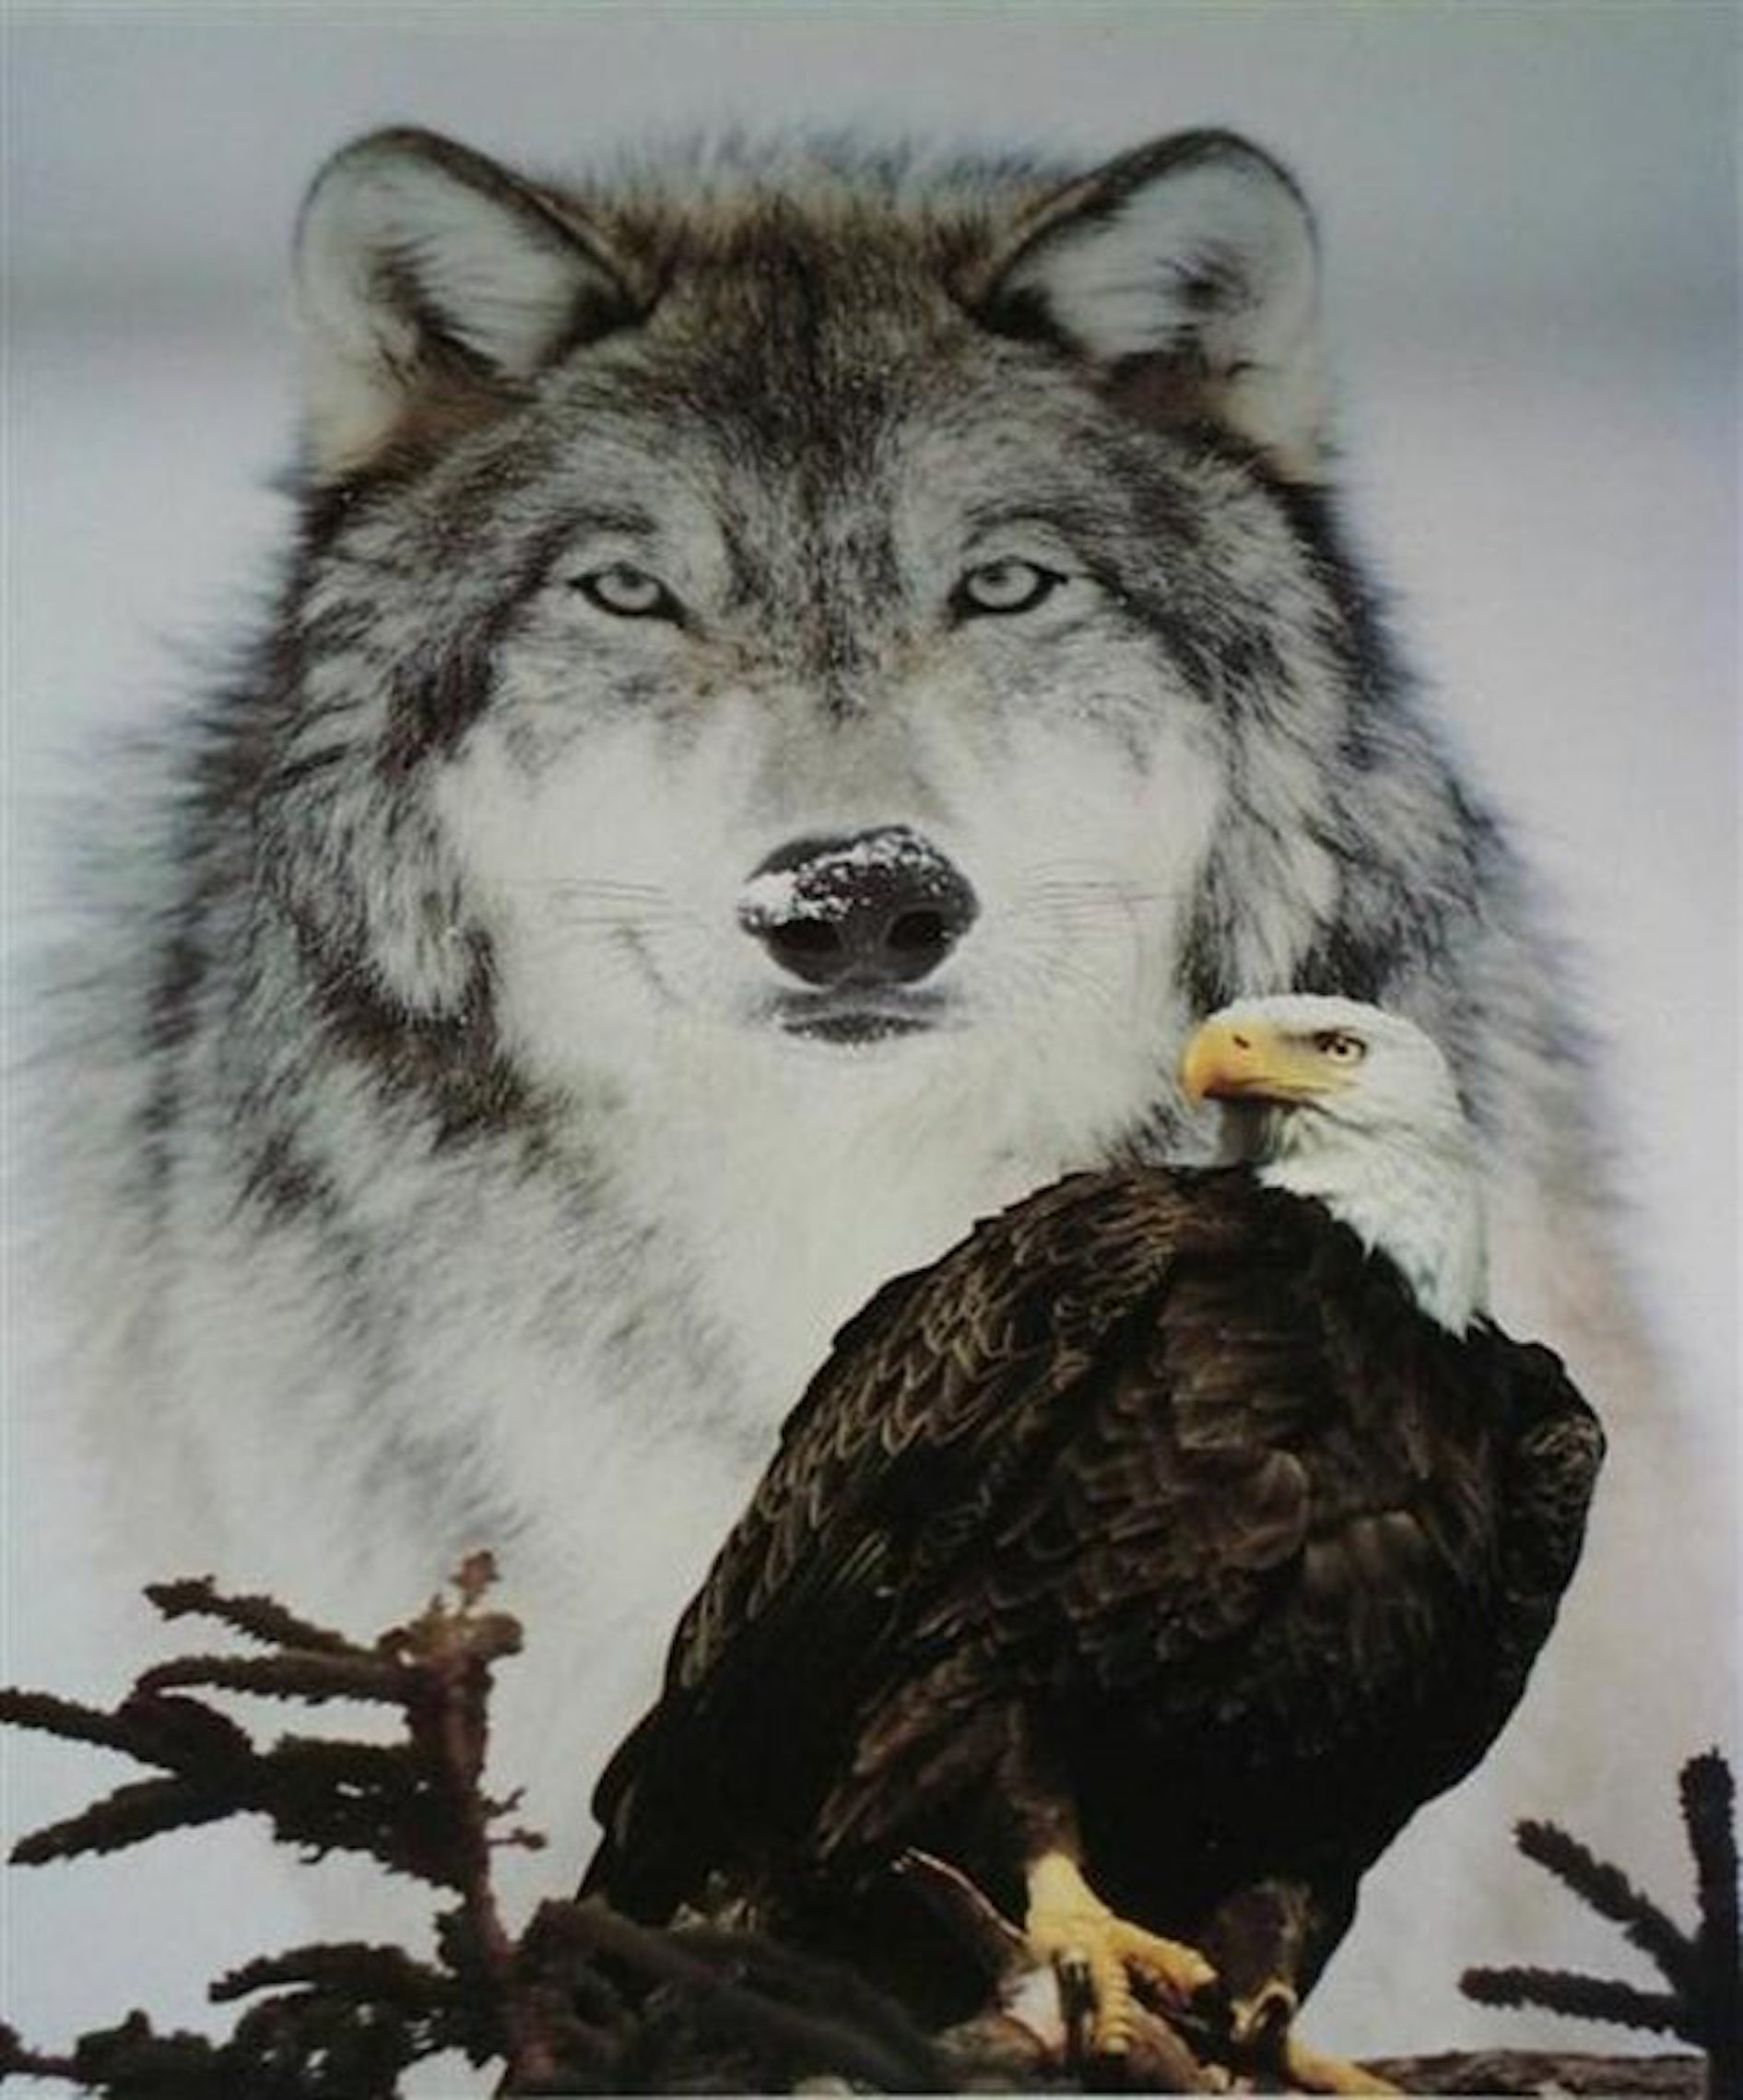 638890__wolf-and-eagle_p